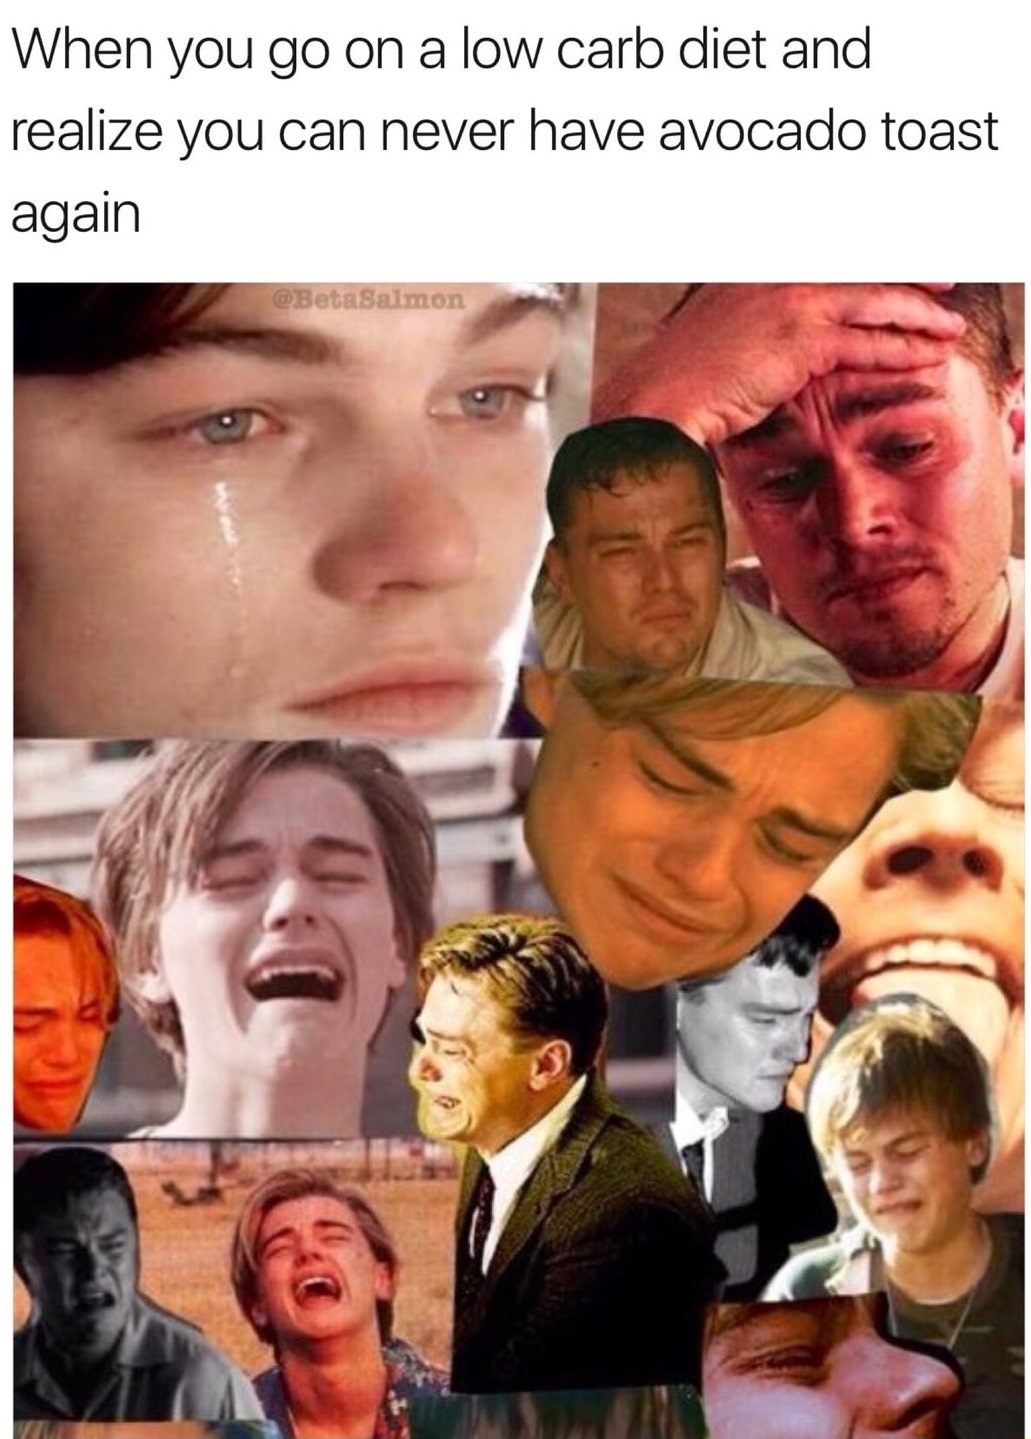 school tomorrow meme dicaprio - When you go on a low carb diet and realize you can never have avocado toast again Salmon